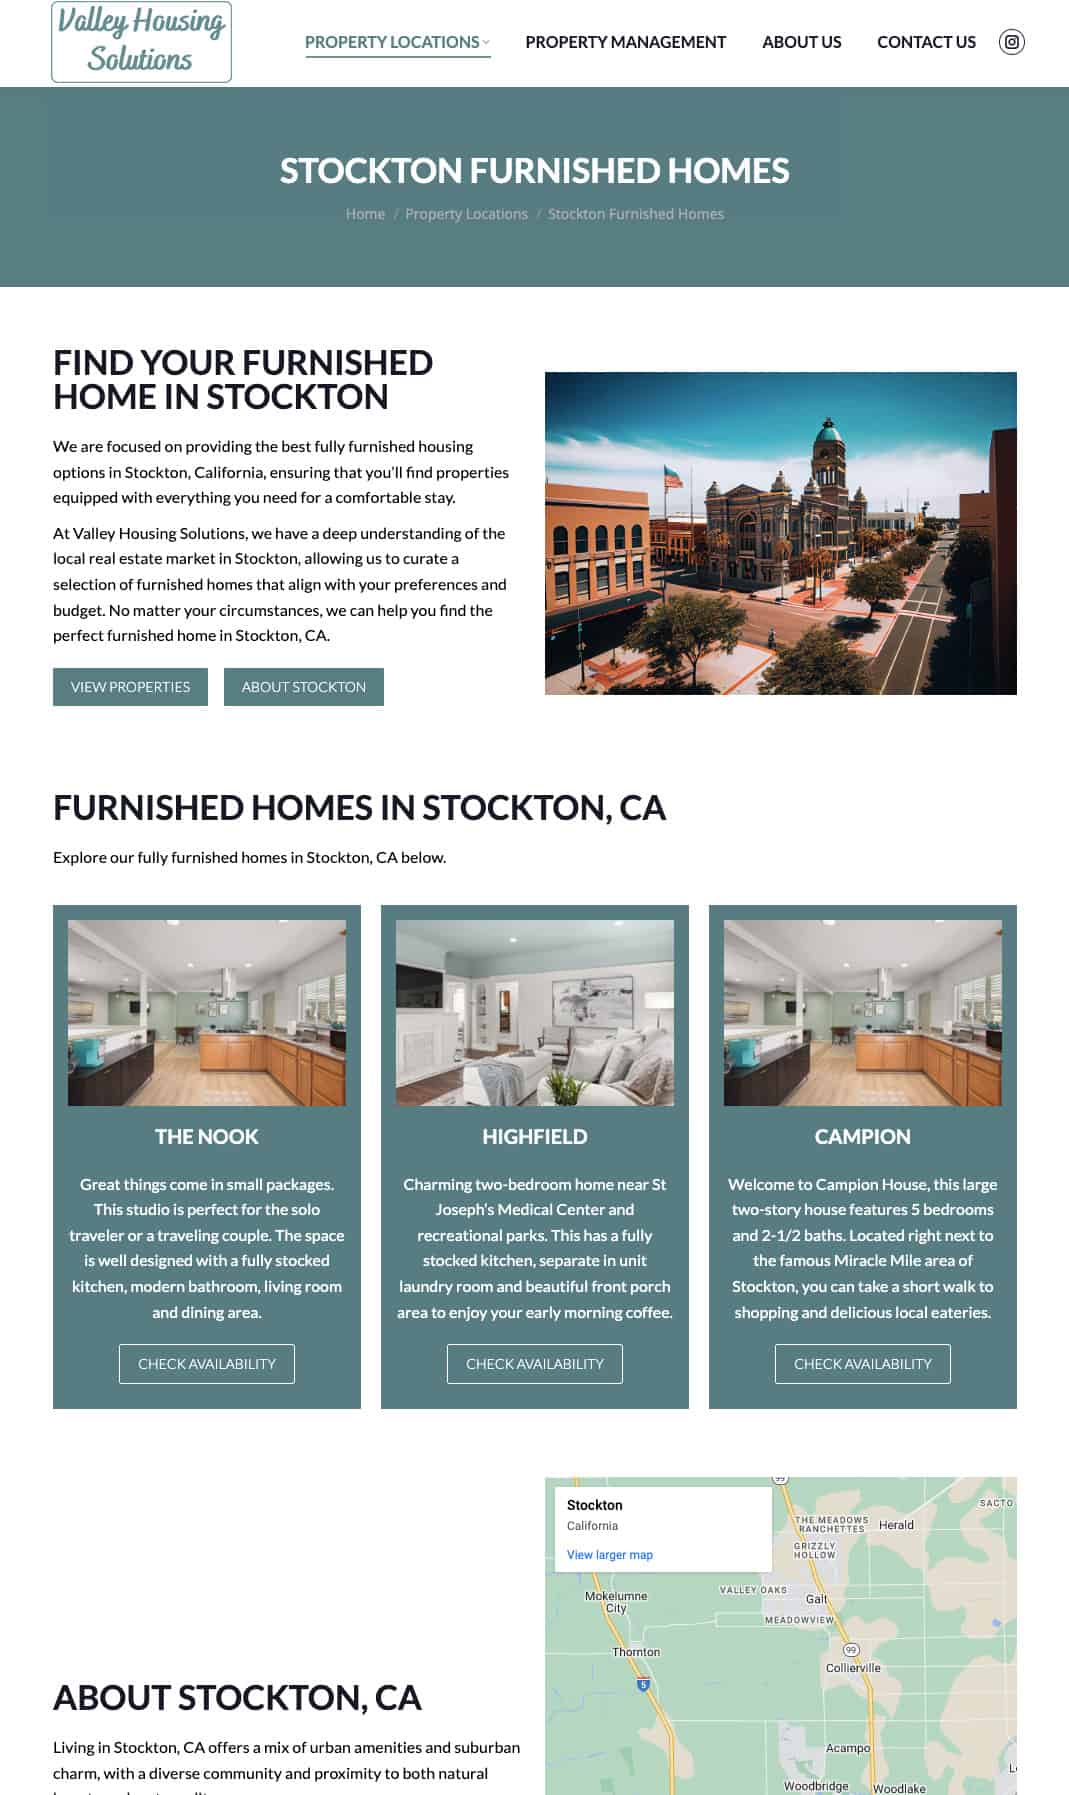 Valley Housing Solutions